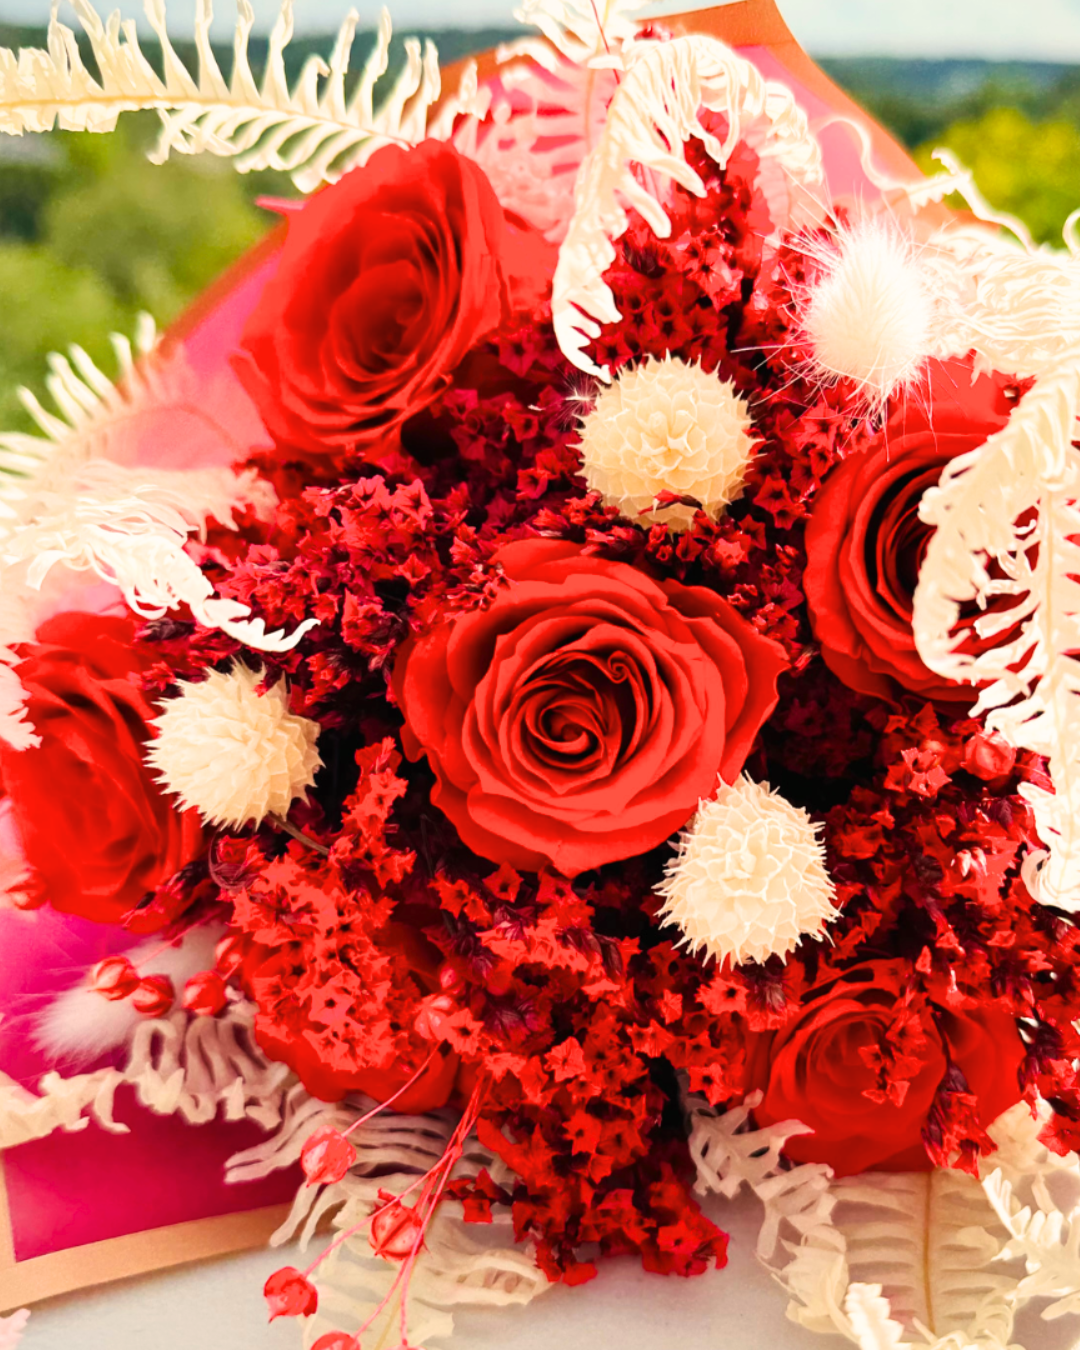 A vibrant red rose bouquet laying on a flat surface made with dried flowers